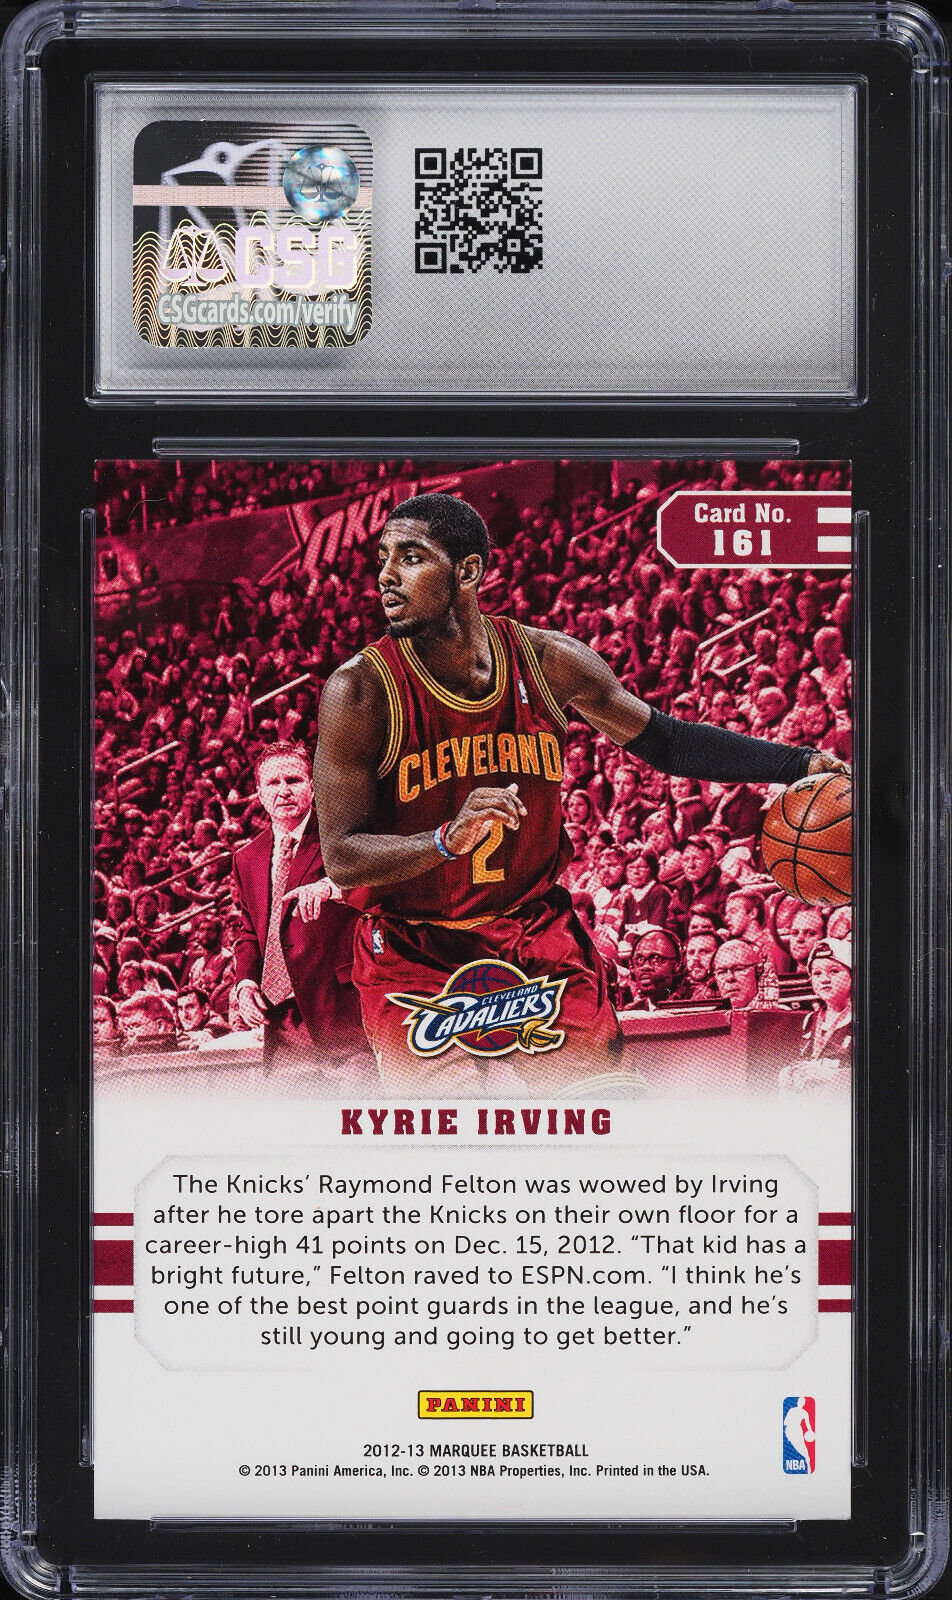 2012 Panini Marquee Kyrie Irving Rookie 161 Csg 9 Mint 1